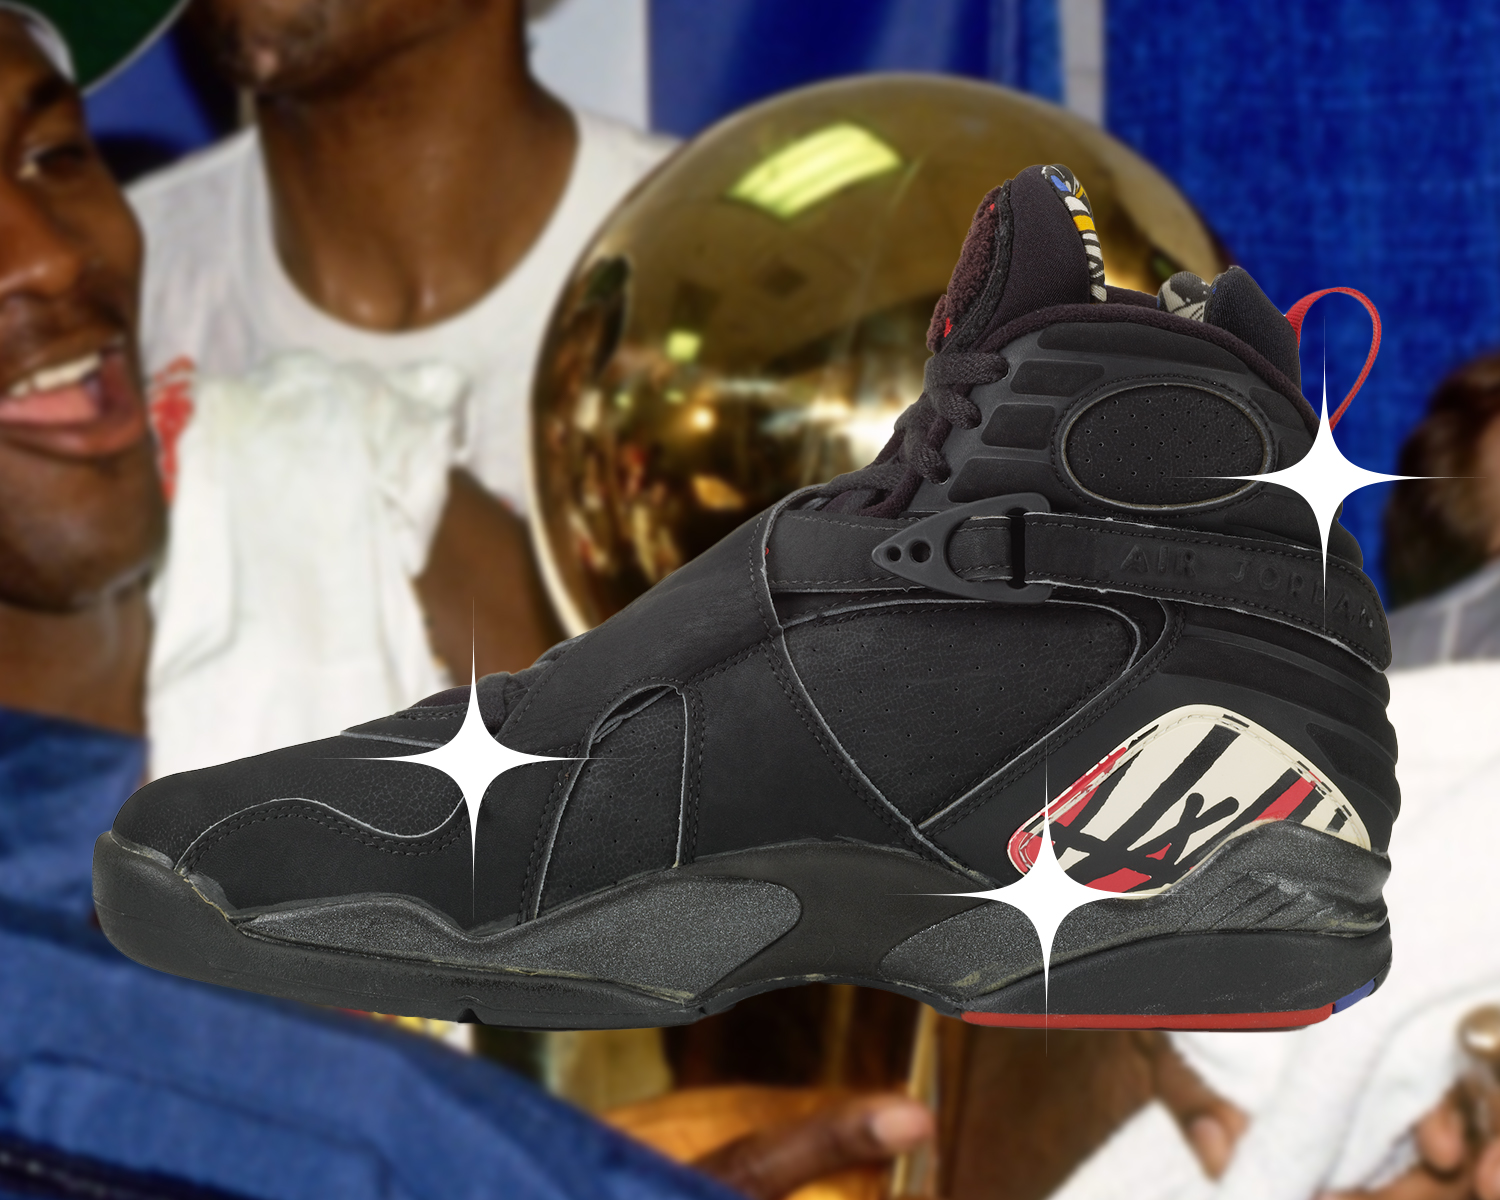 Michael Jordan's Six NBA Championship Sneakers To Be On Display for the  First Time Ever